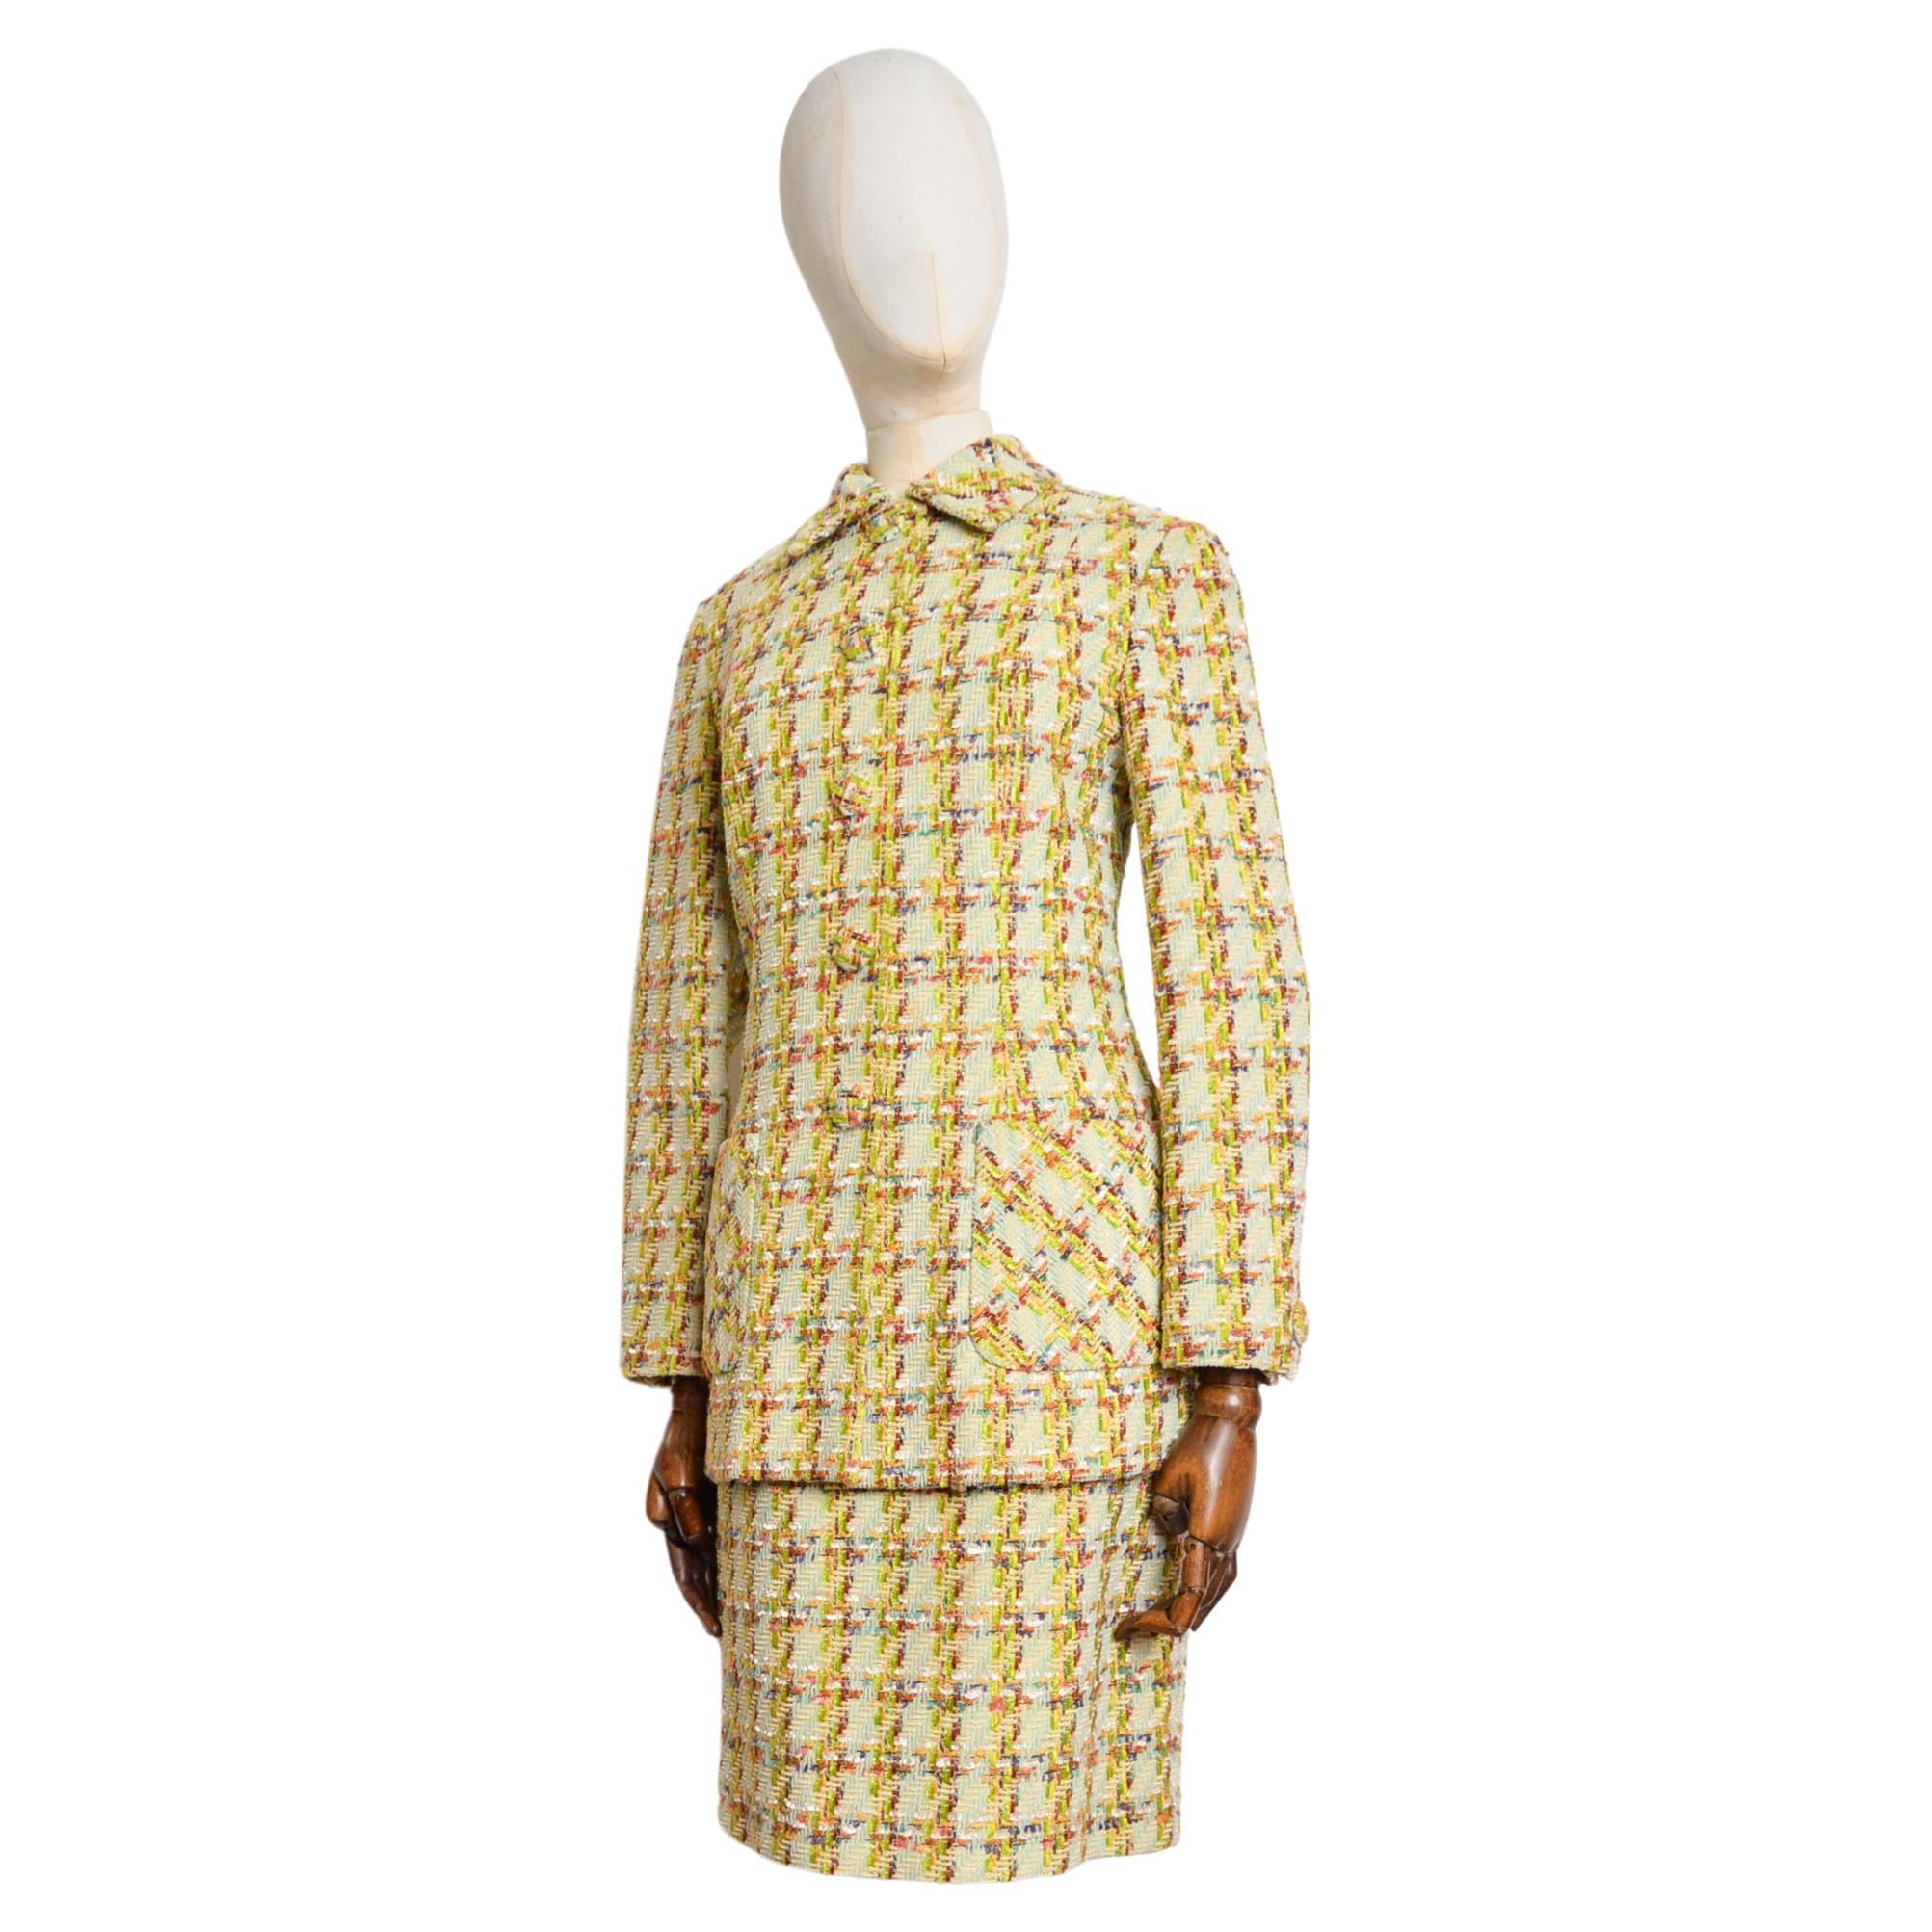 S/S 1993 ROCHAS Jewel Tone Lime Green Tweed Boucle Jacket & Skirt Matching Set For Sale